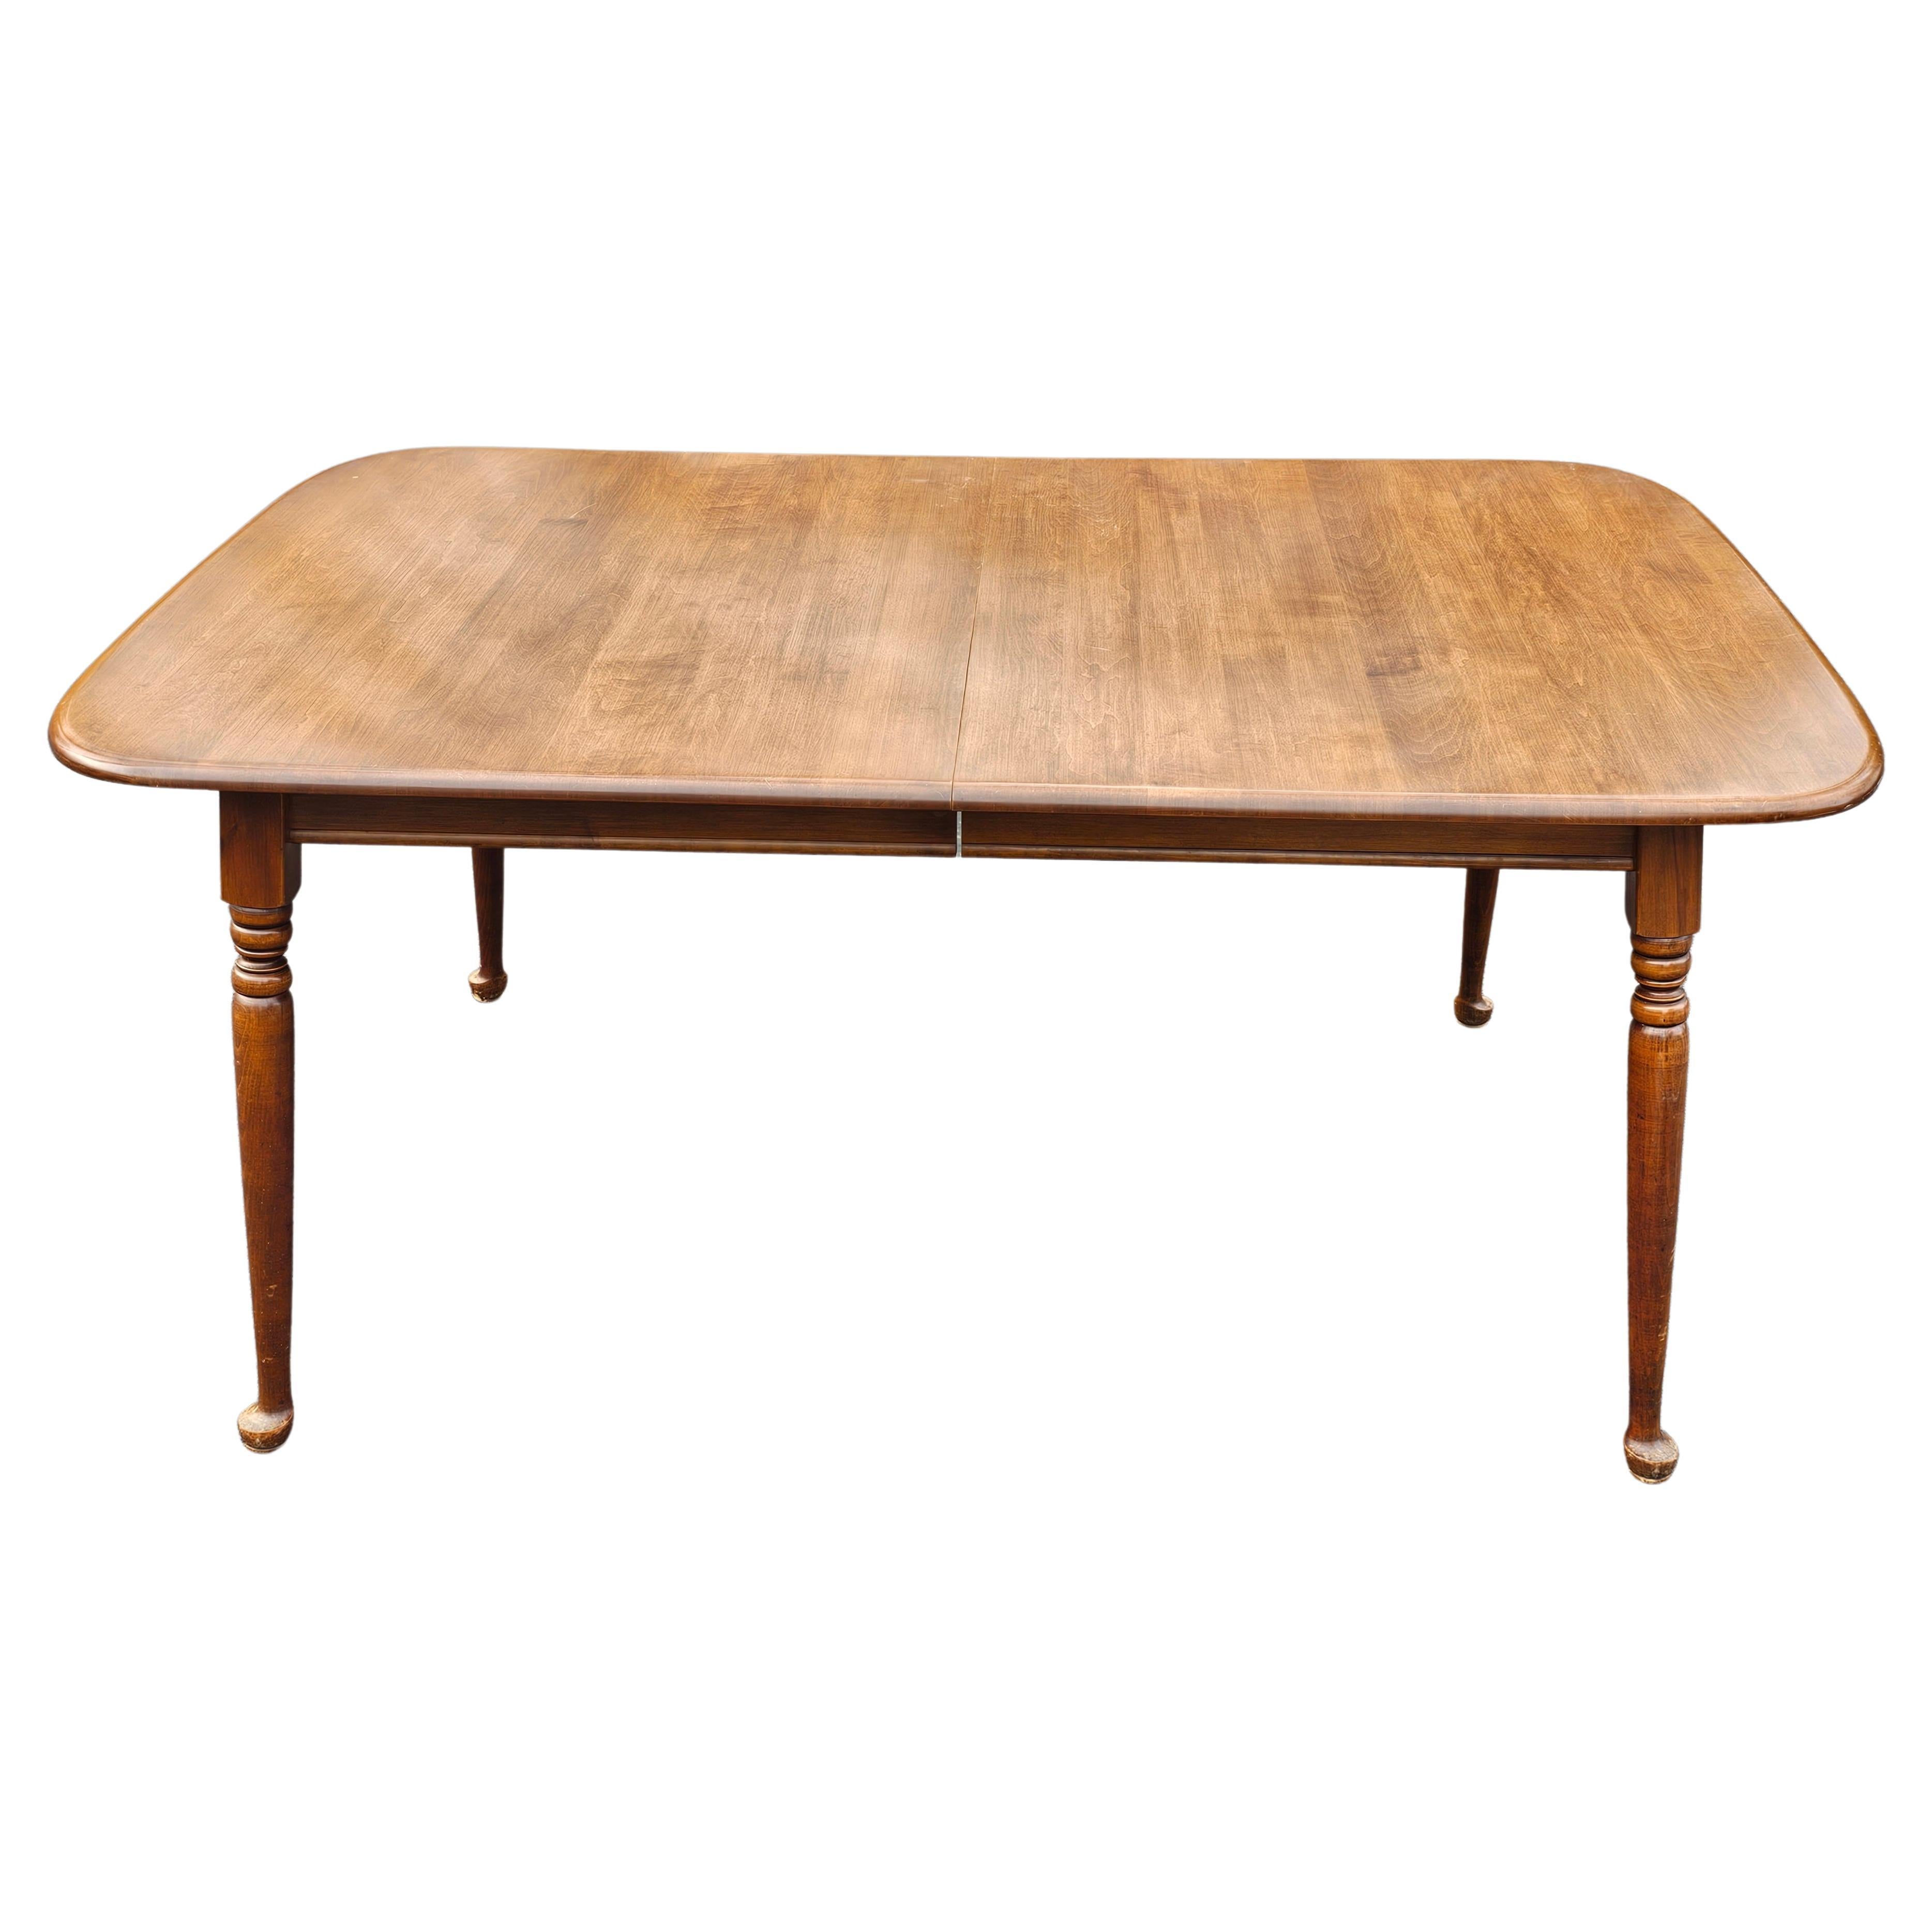 A Heywood Wakefield solid Maple Cinnamon Colonial Style 3-leaf extension dining table with Watertown Slide extension mechanism. Top in great condition. Come with protective pads. Virtually scratch free. Very good vintage condition. Measures 64